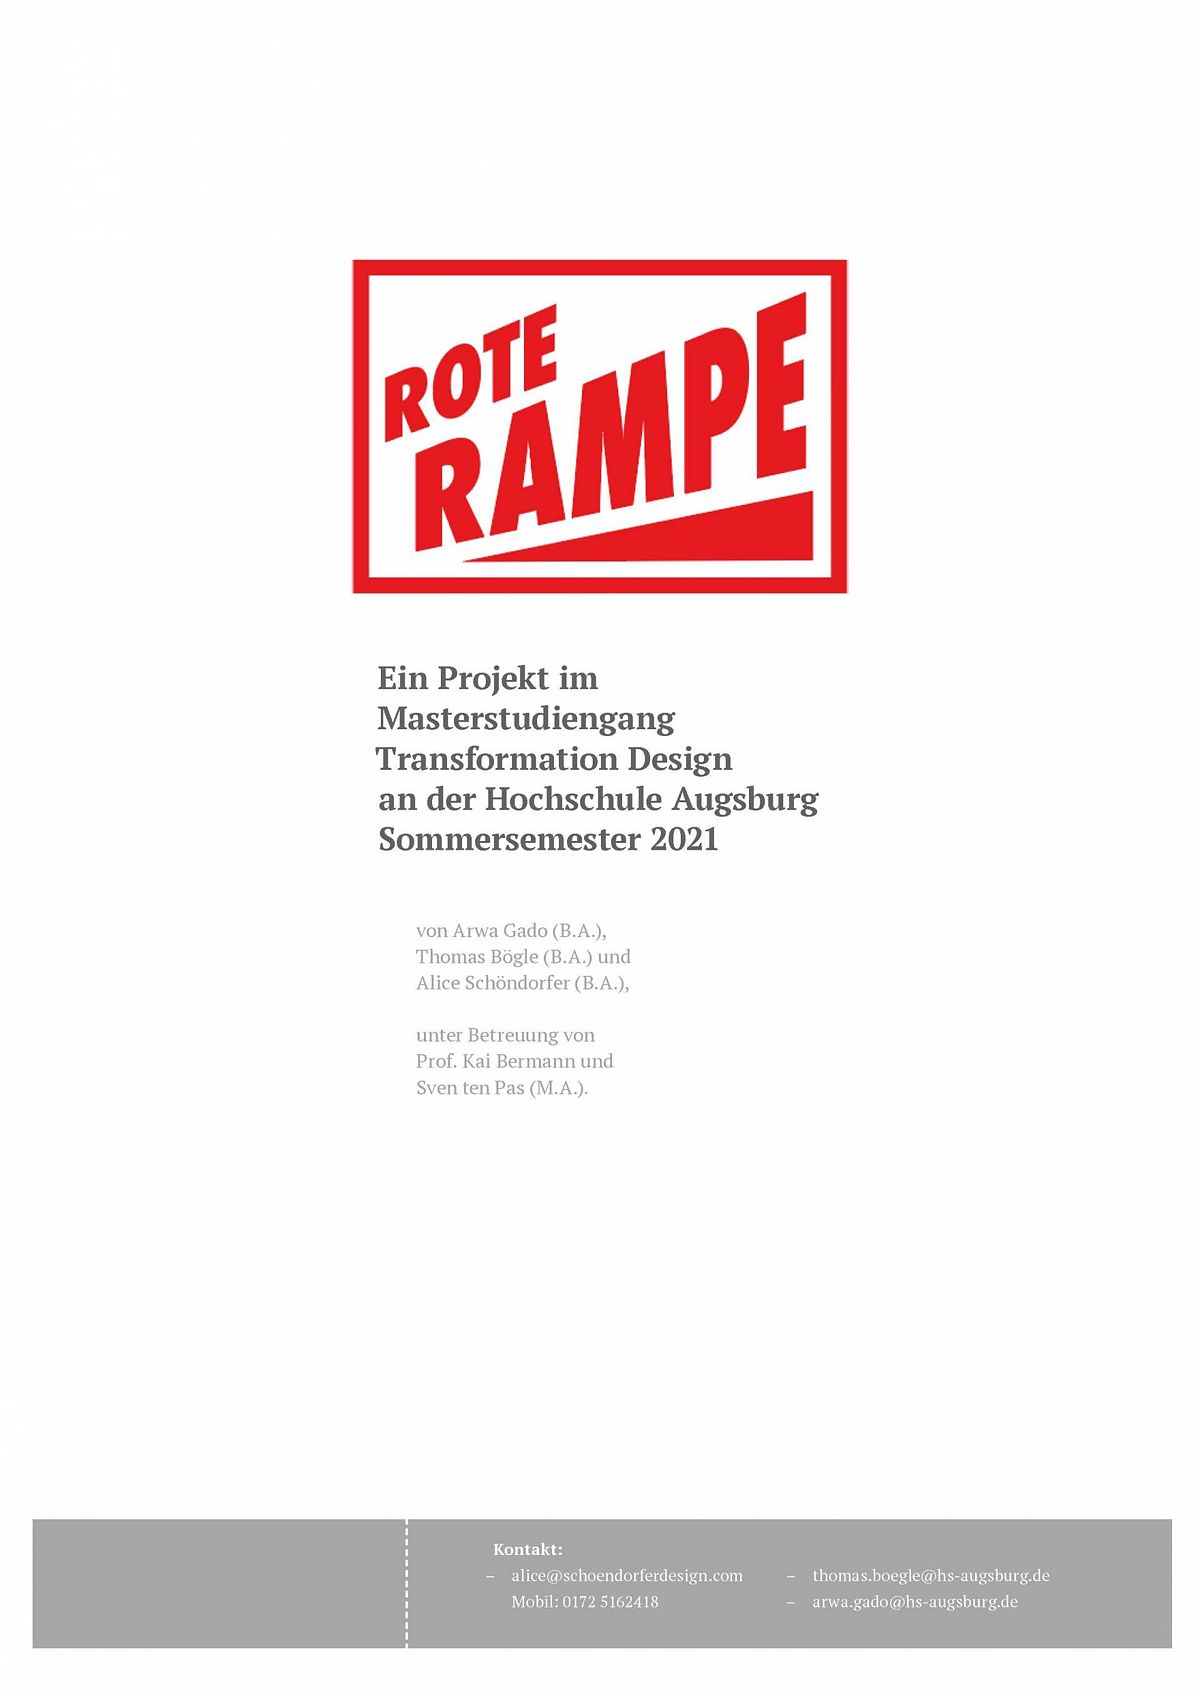 Booklet: Rote Rampe